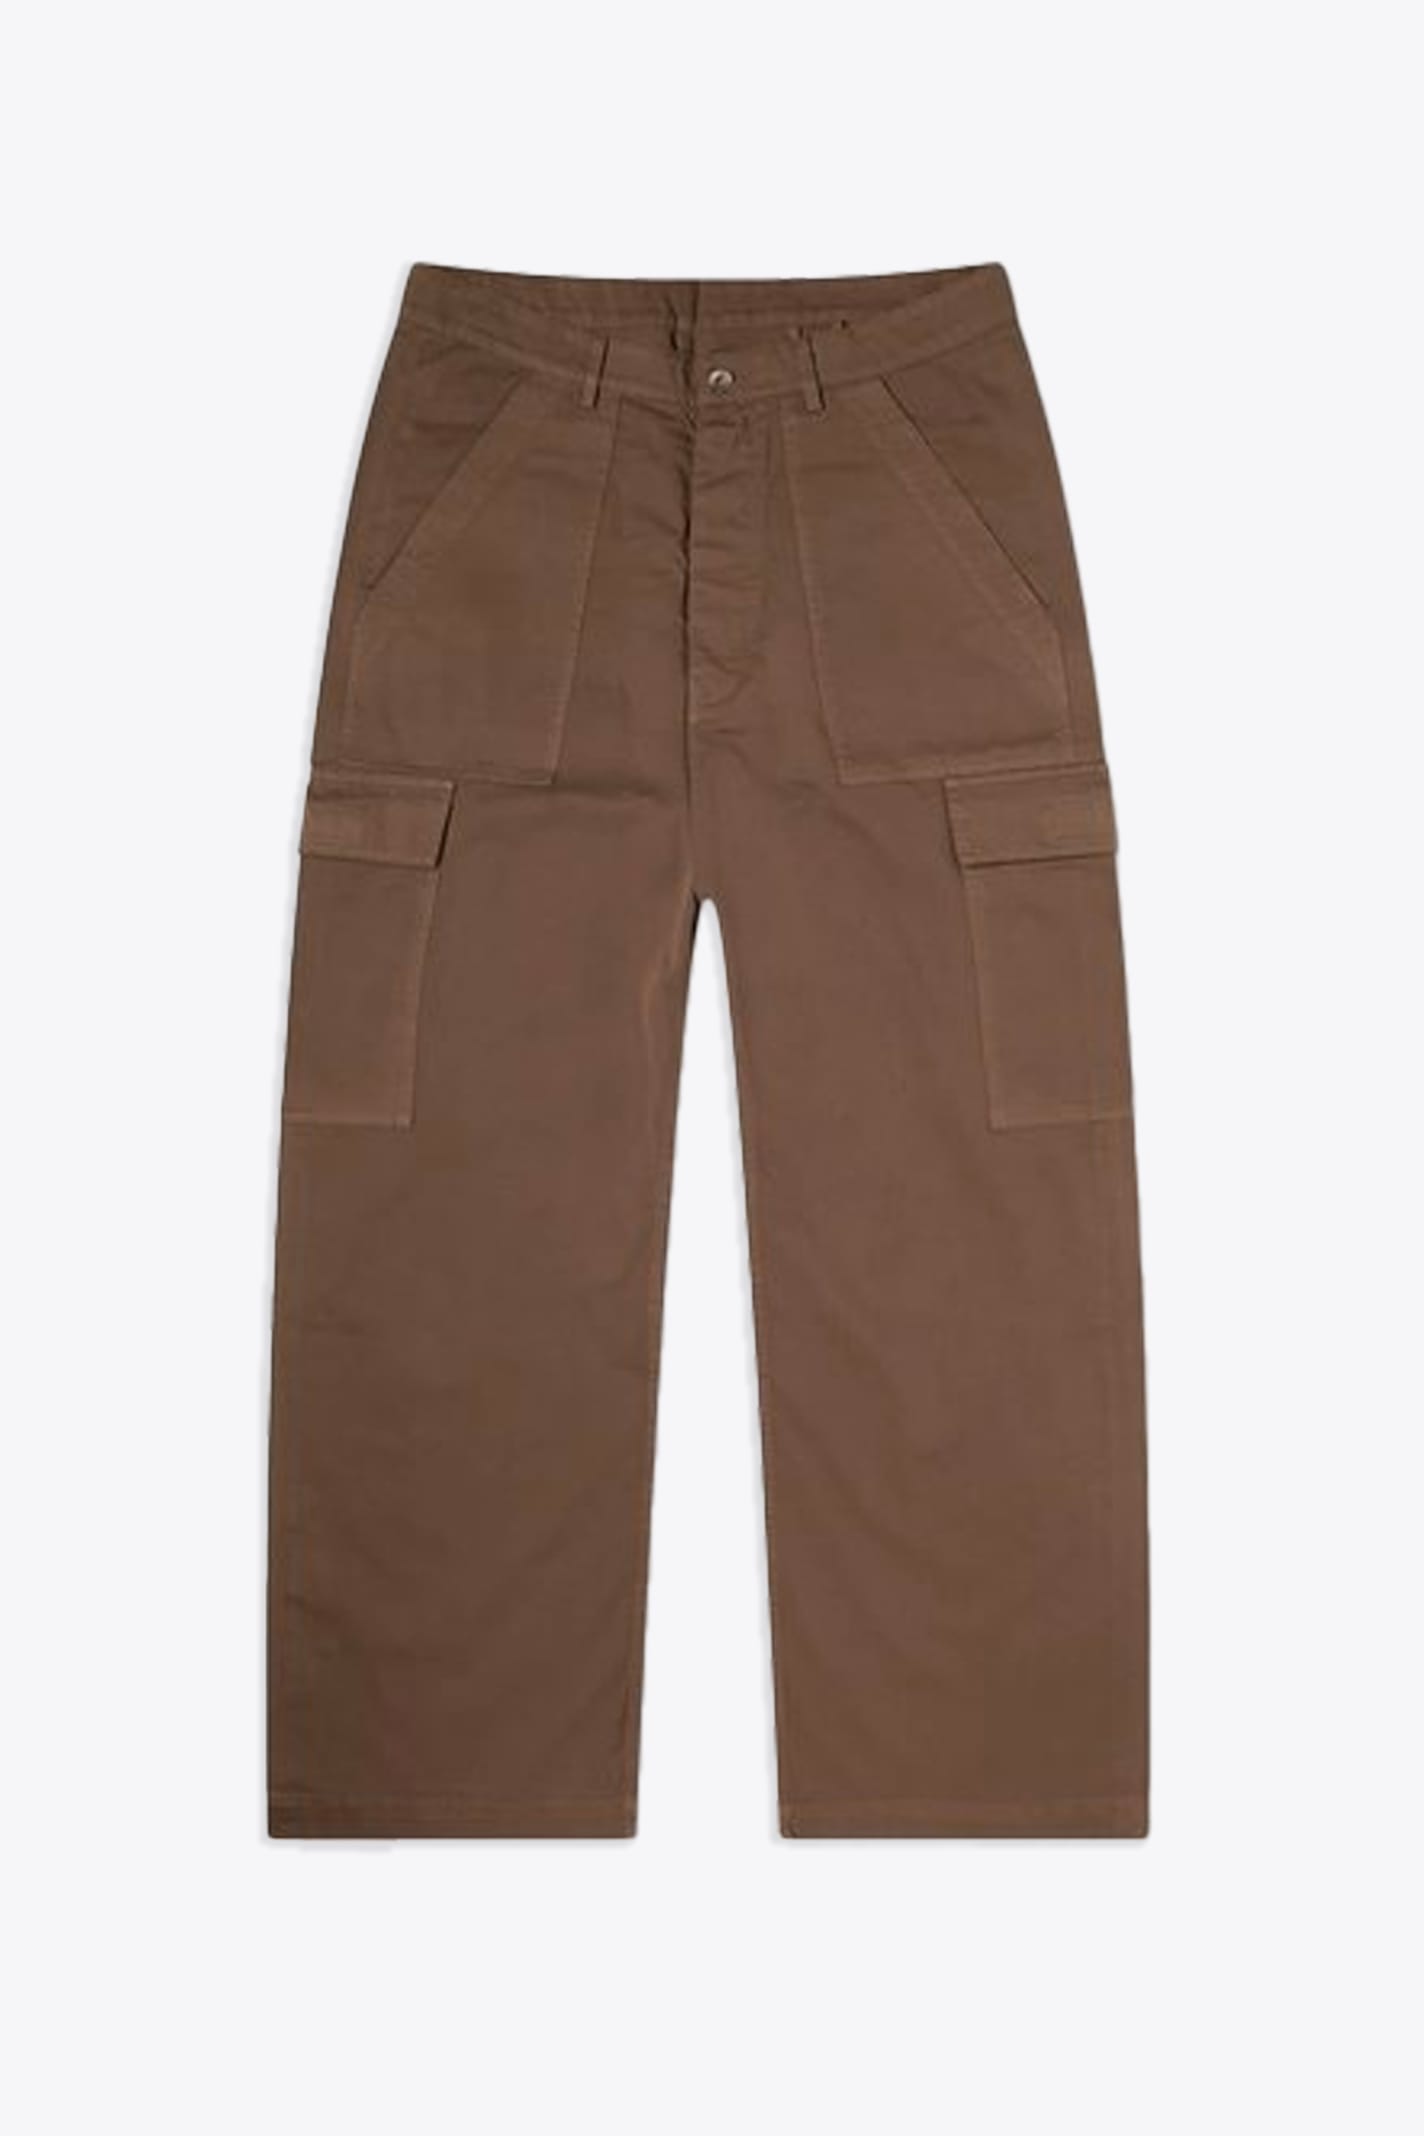 Cargo Trousers Brown cotton cargo pant - Cargo trousers